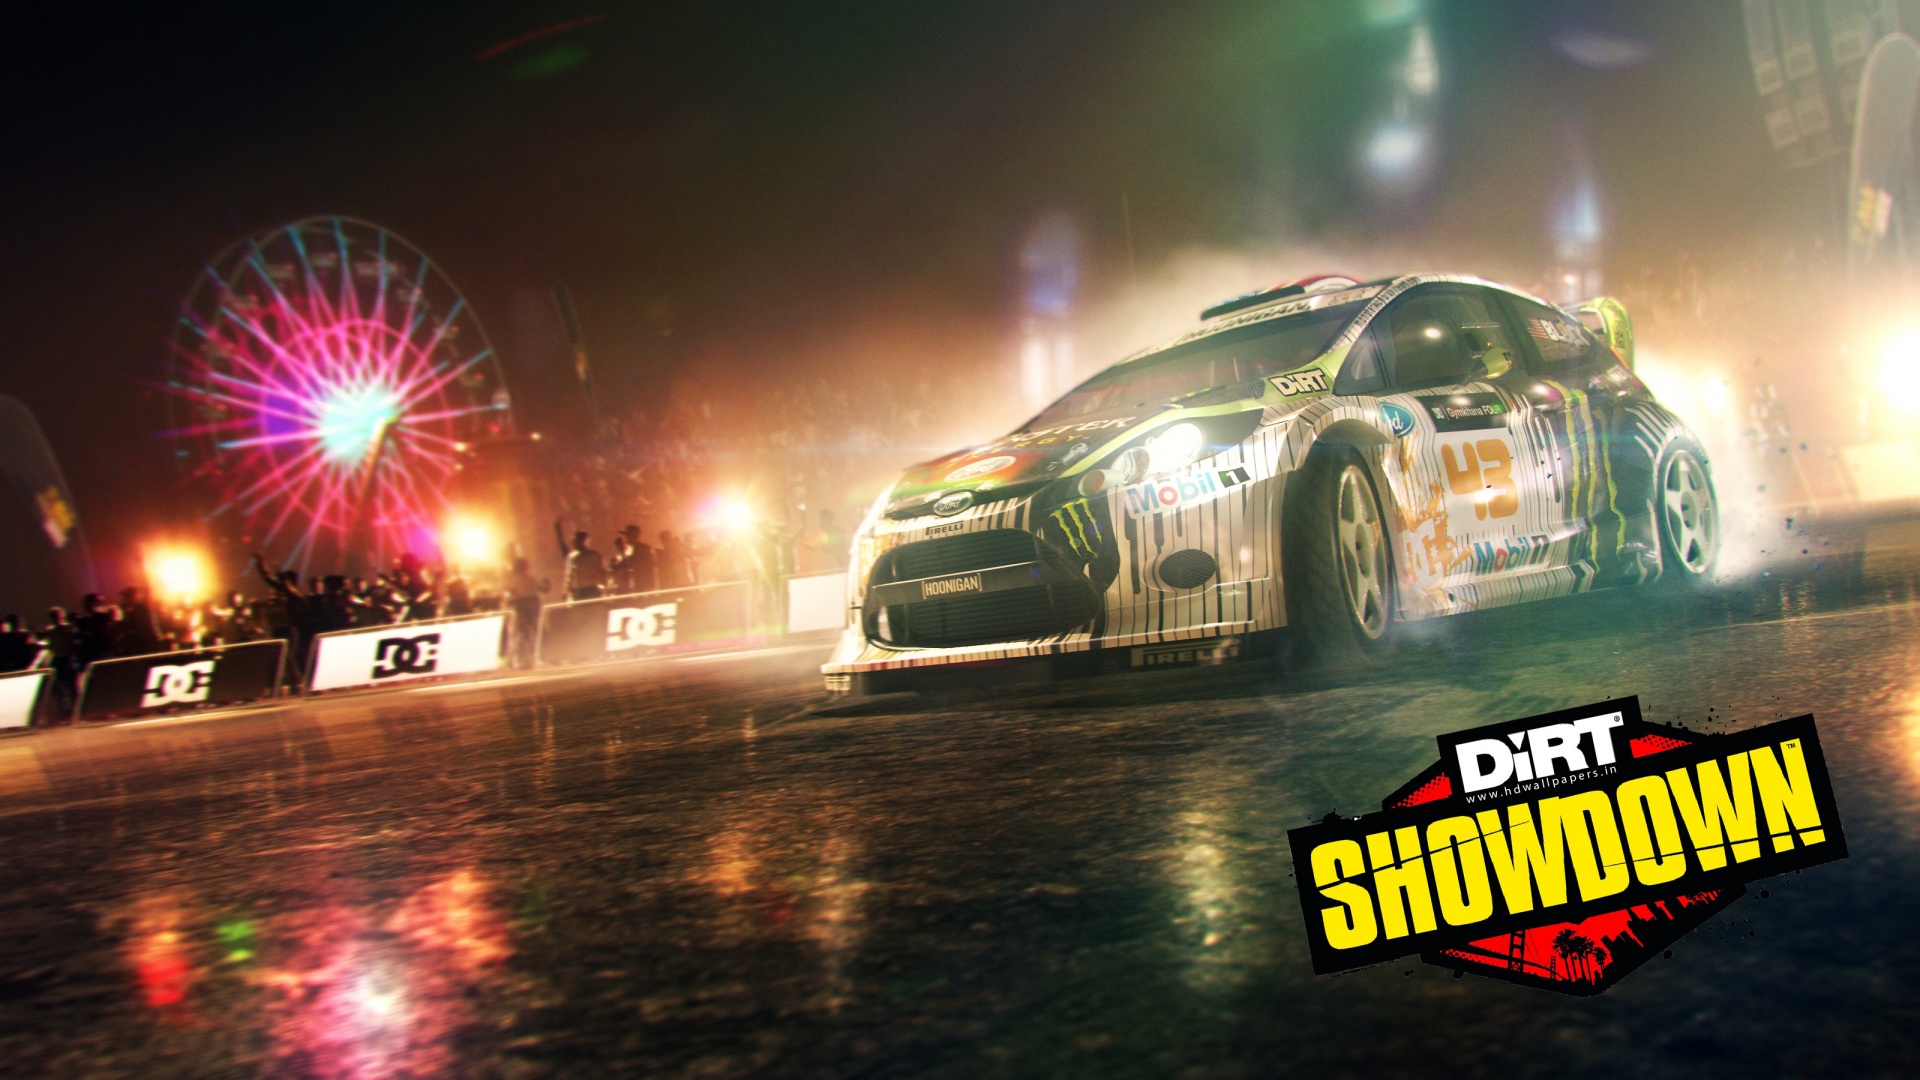 Show Off Your Love for Racing with Free Dirt Showdown Wallpaper for Desktop